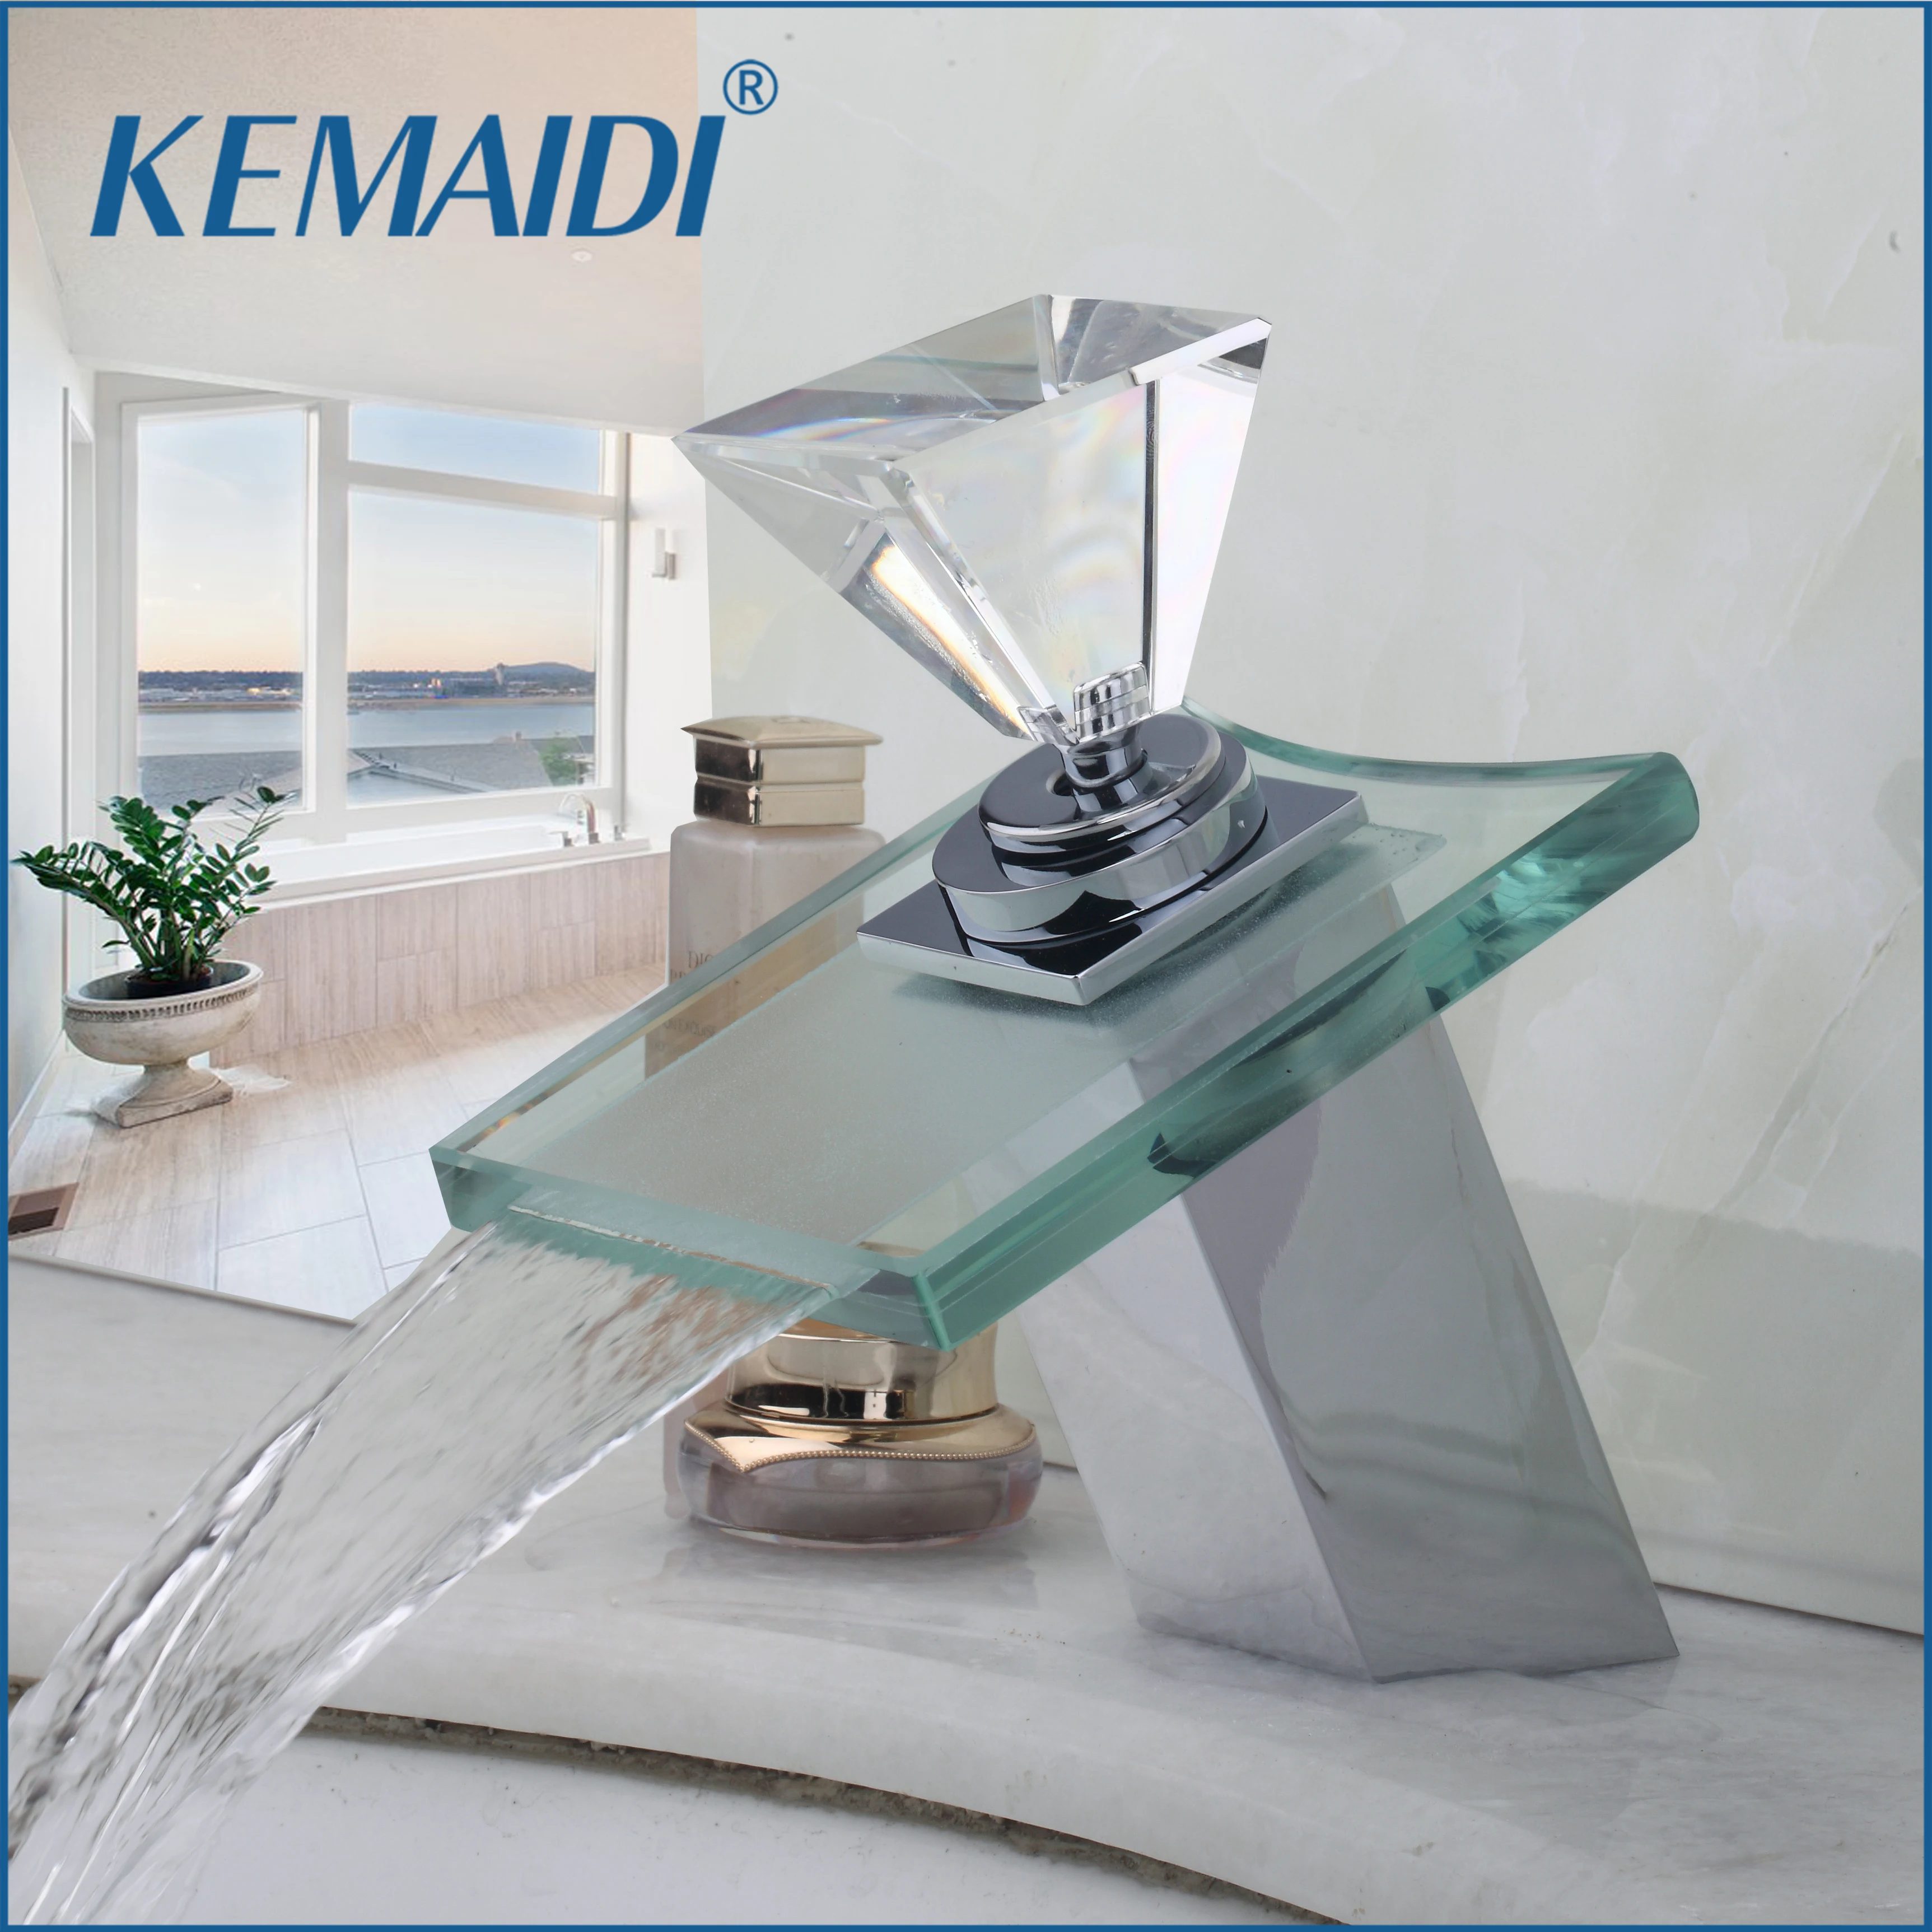 

KEMAIDI RU Bathroom Faucets Luxury Square Deck Mount Waterfall Glass Brass Basin Sink Faucet Tap Diamond Handle Mixers & Taps